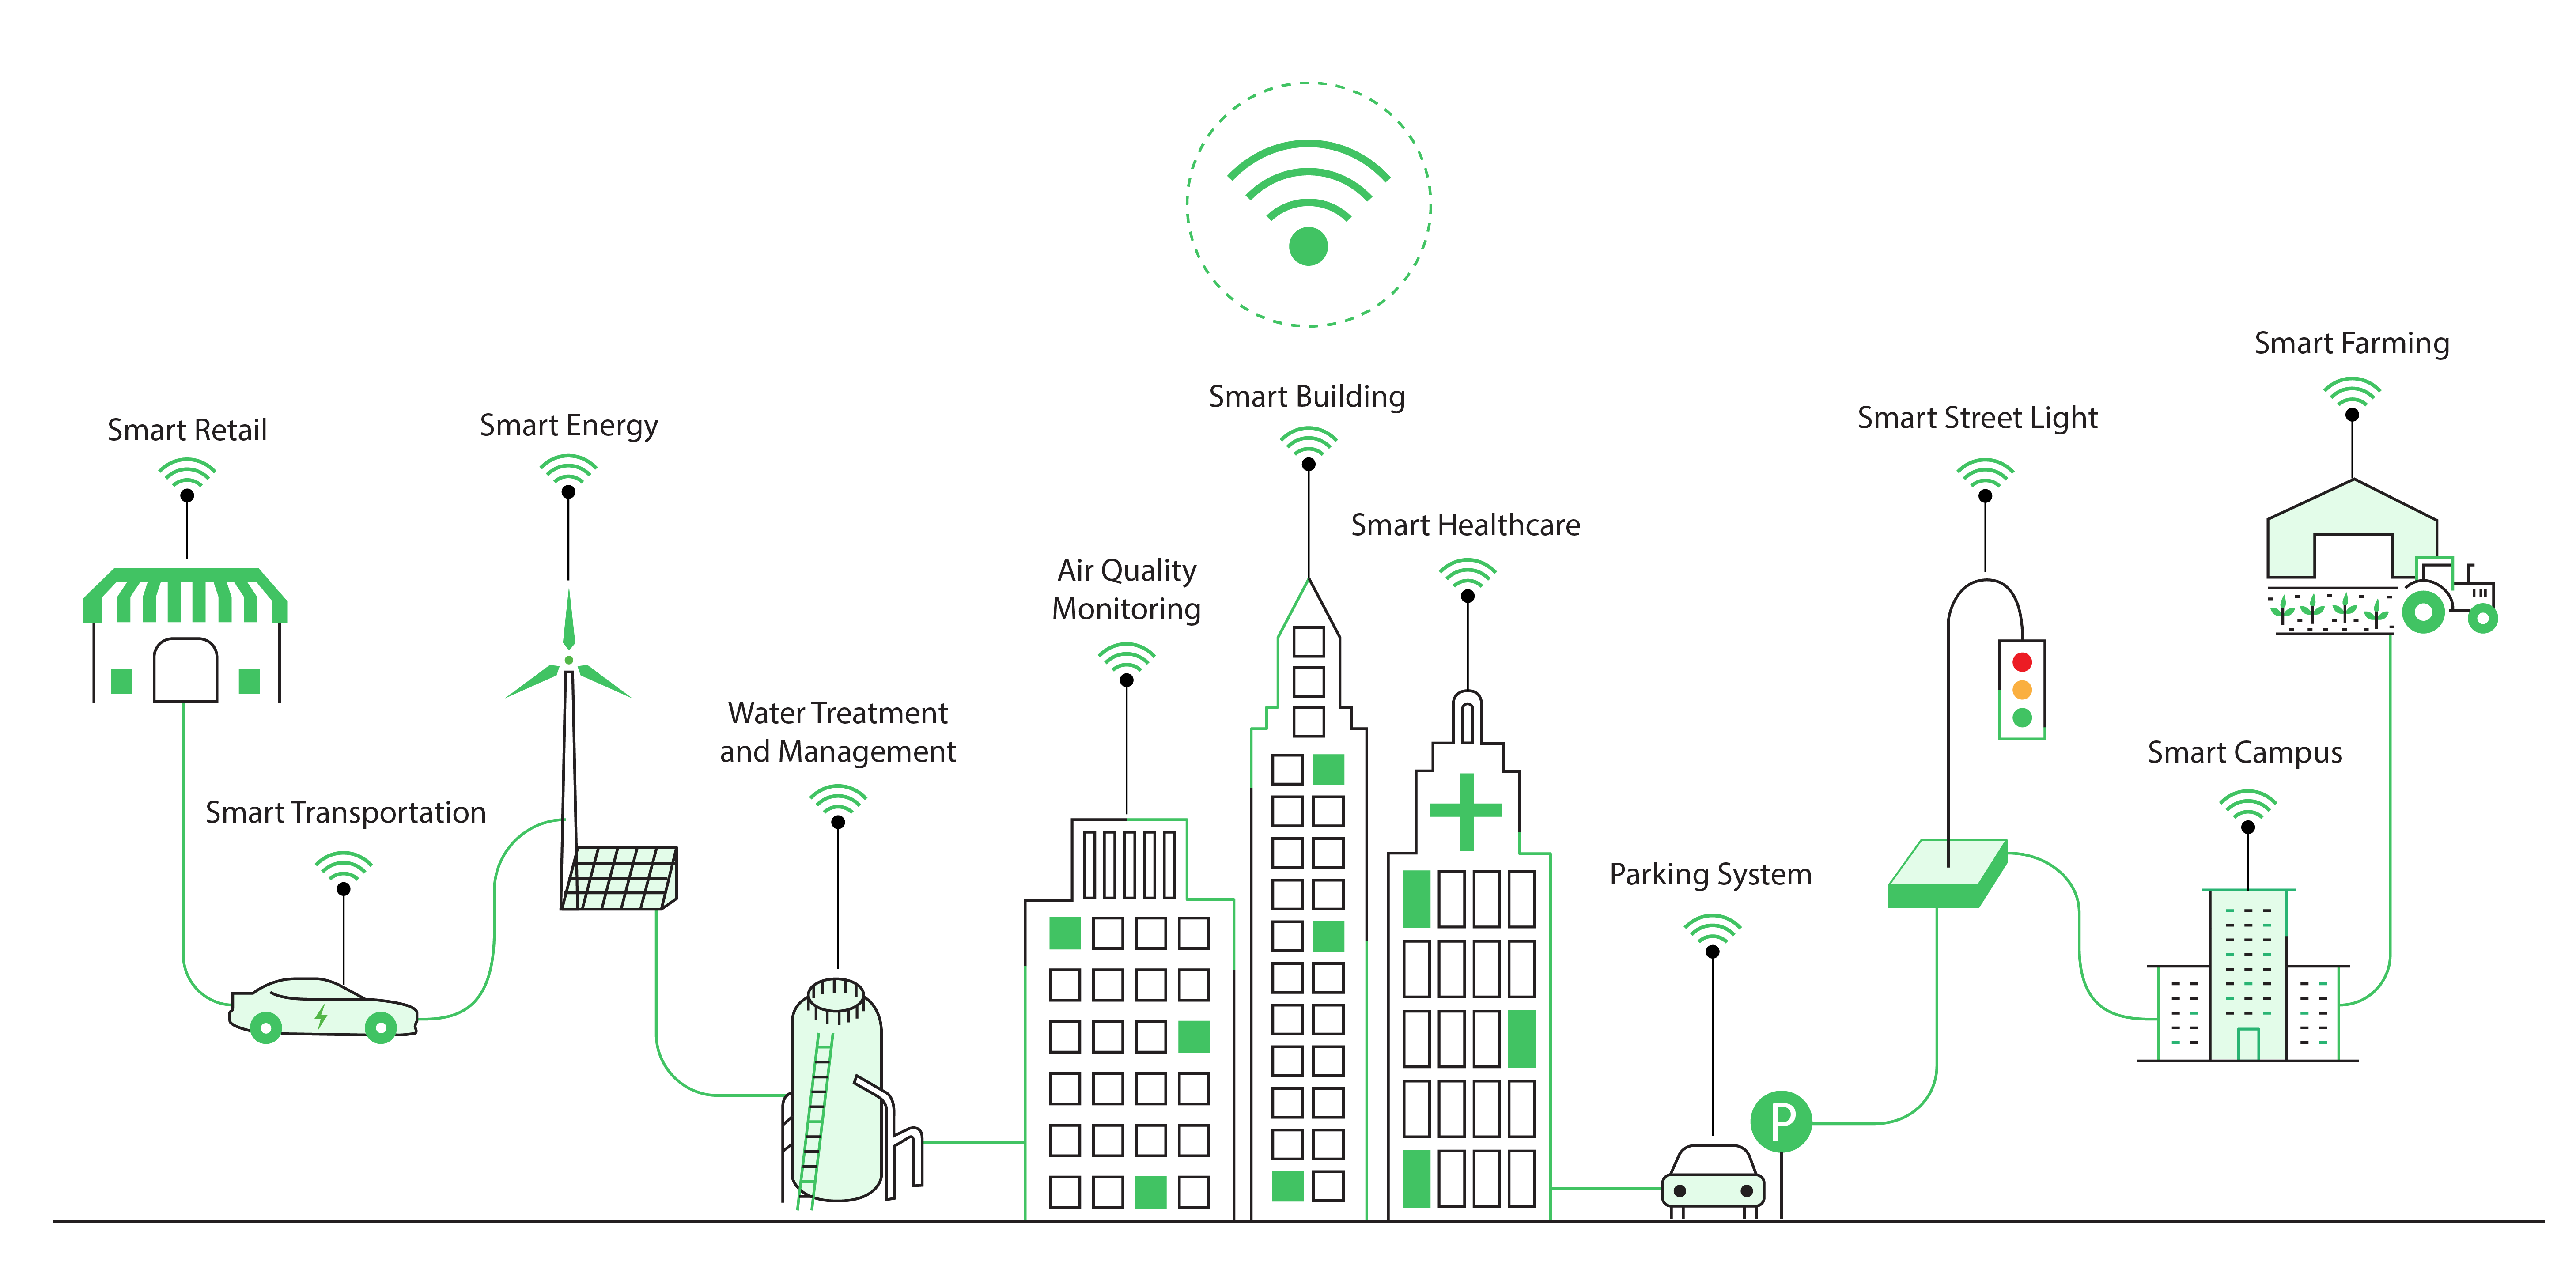 IoT Cloud based Smart Bin for Connected Smart Cities - A Product Design  Approach